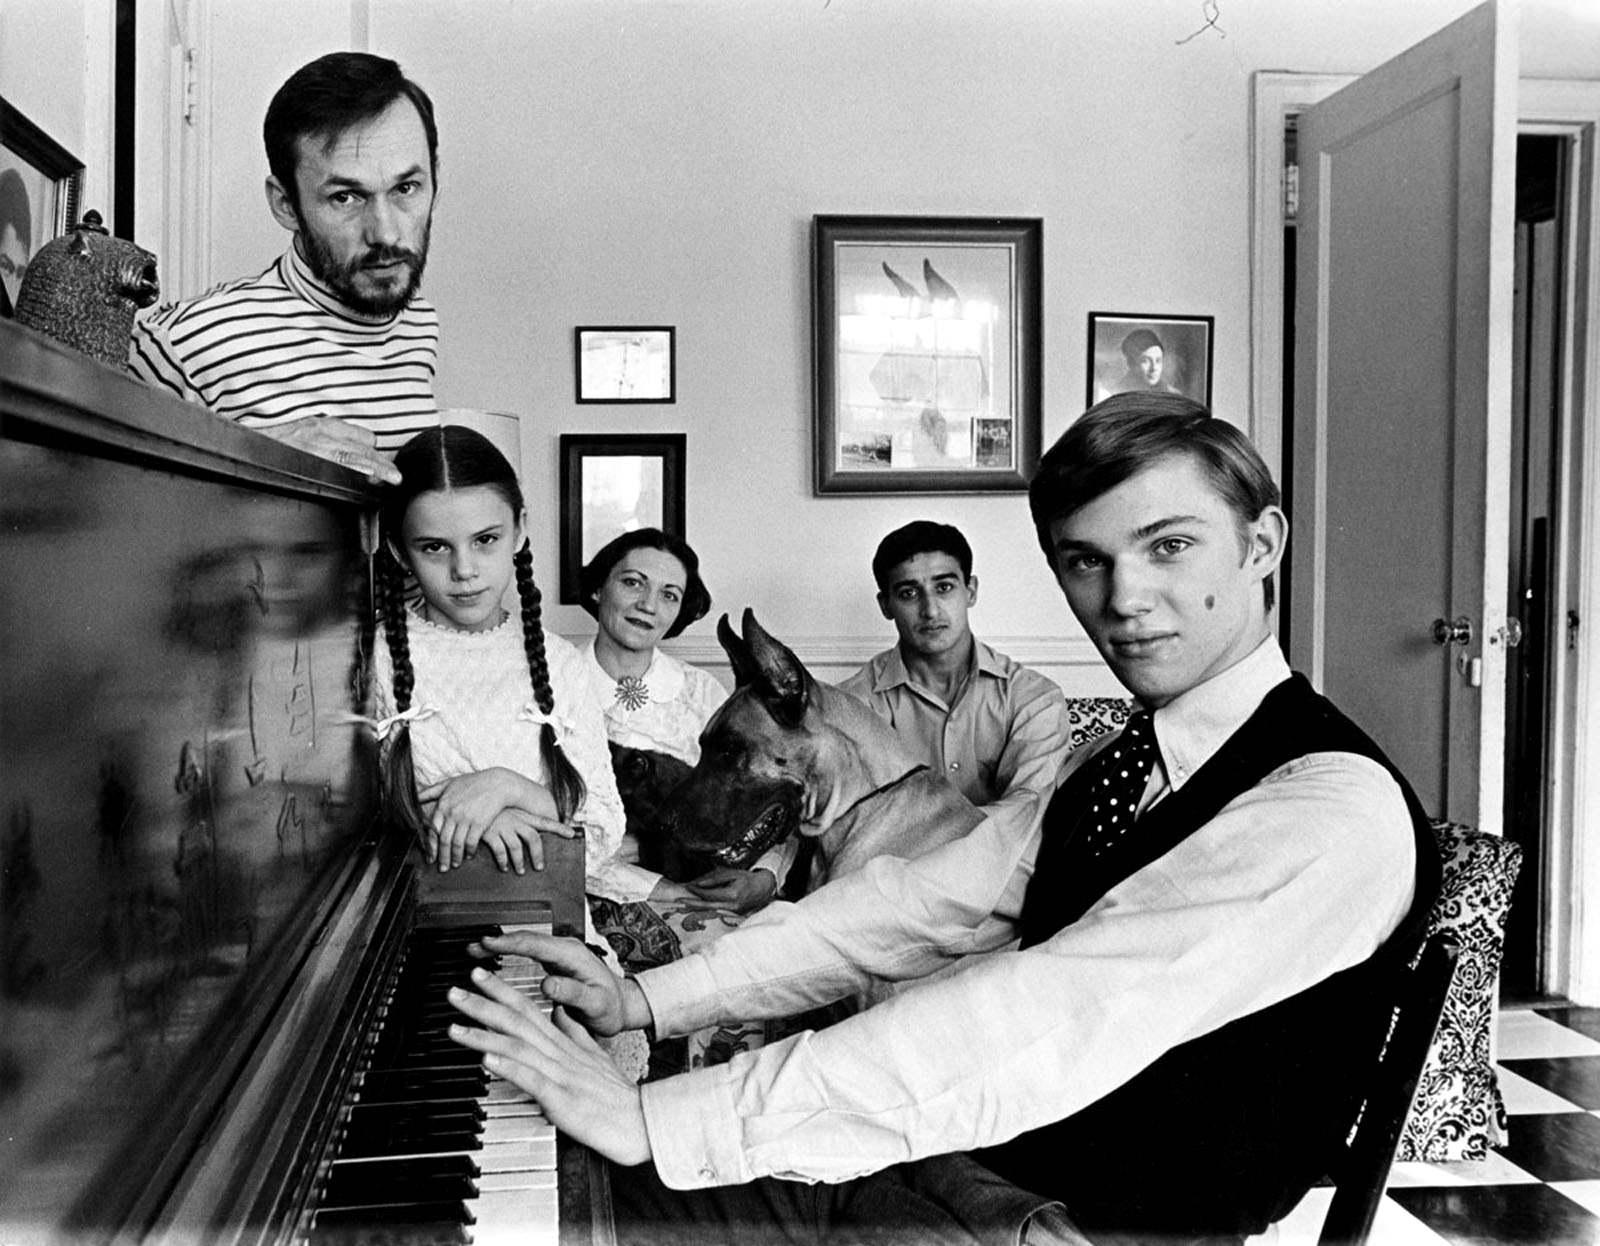 Jack Mitchell Black and White Photograph - 16 year old 'The Waltons' actor Richard Thomas at home with his family